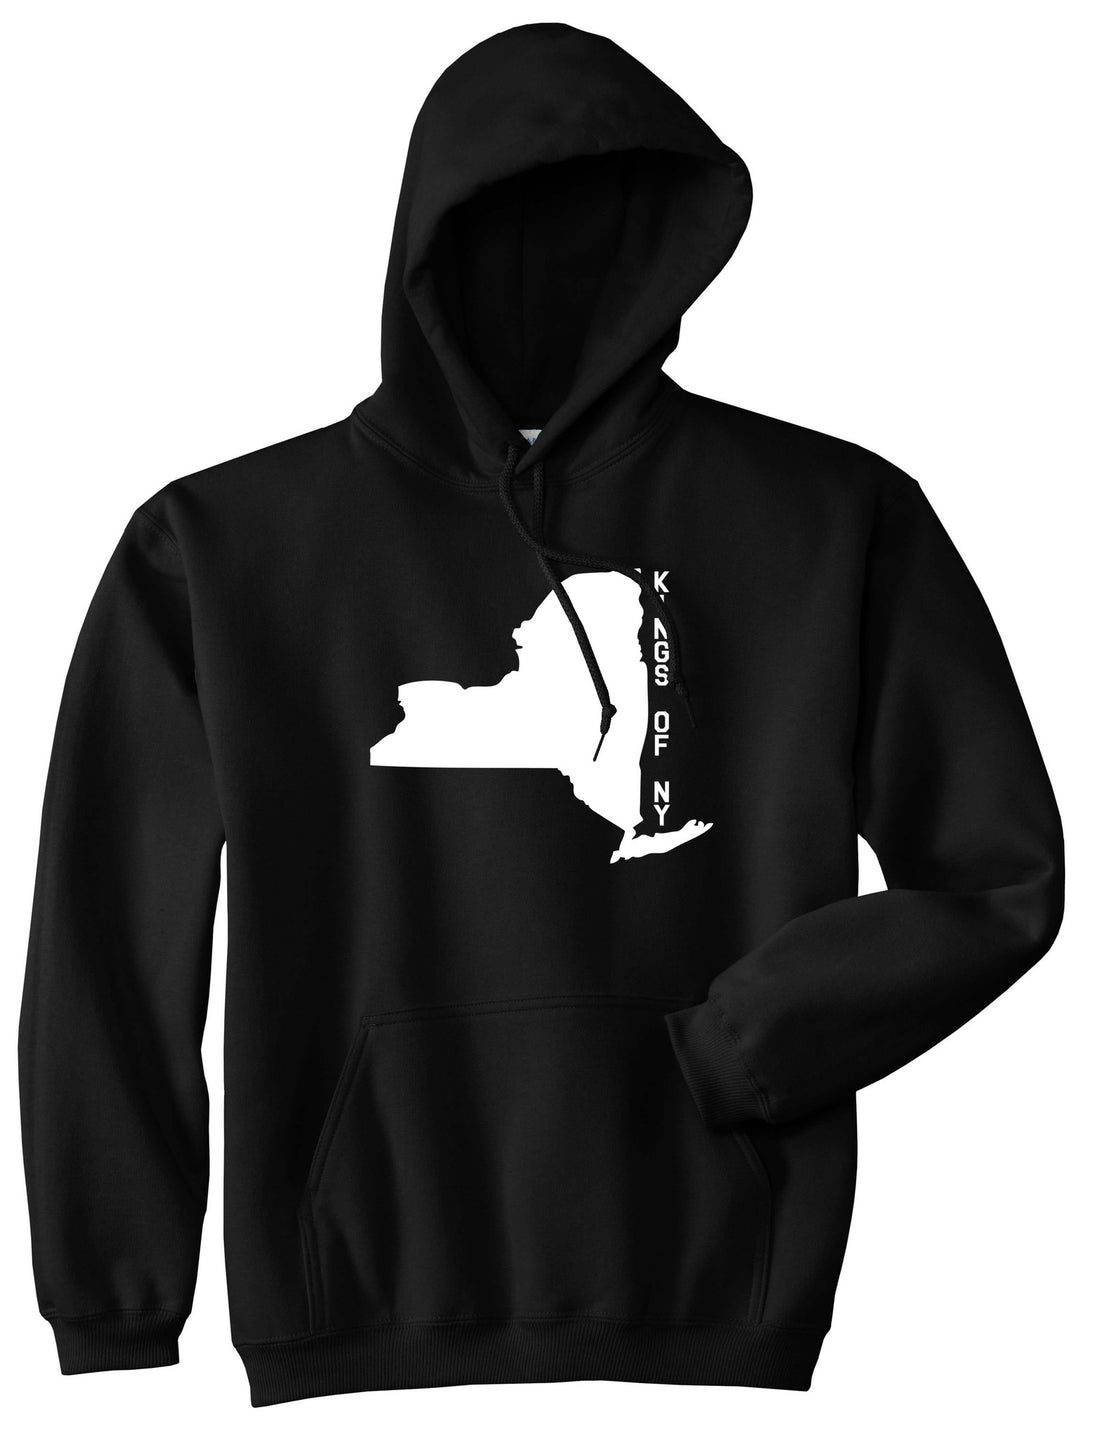 New York State Shape Pullover Hoodie in Black By Kings Of NY